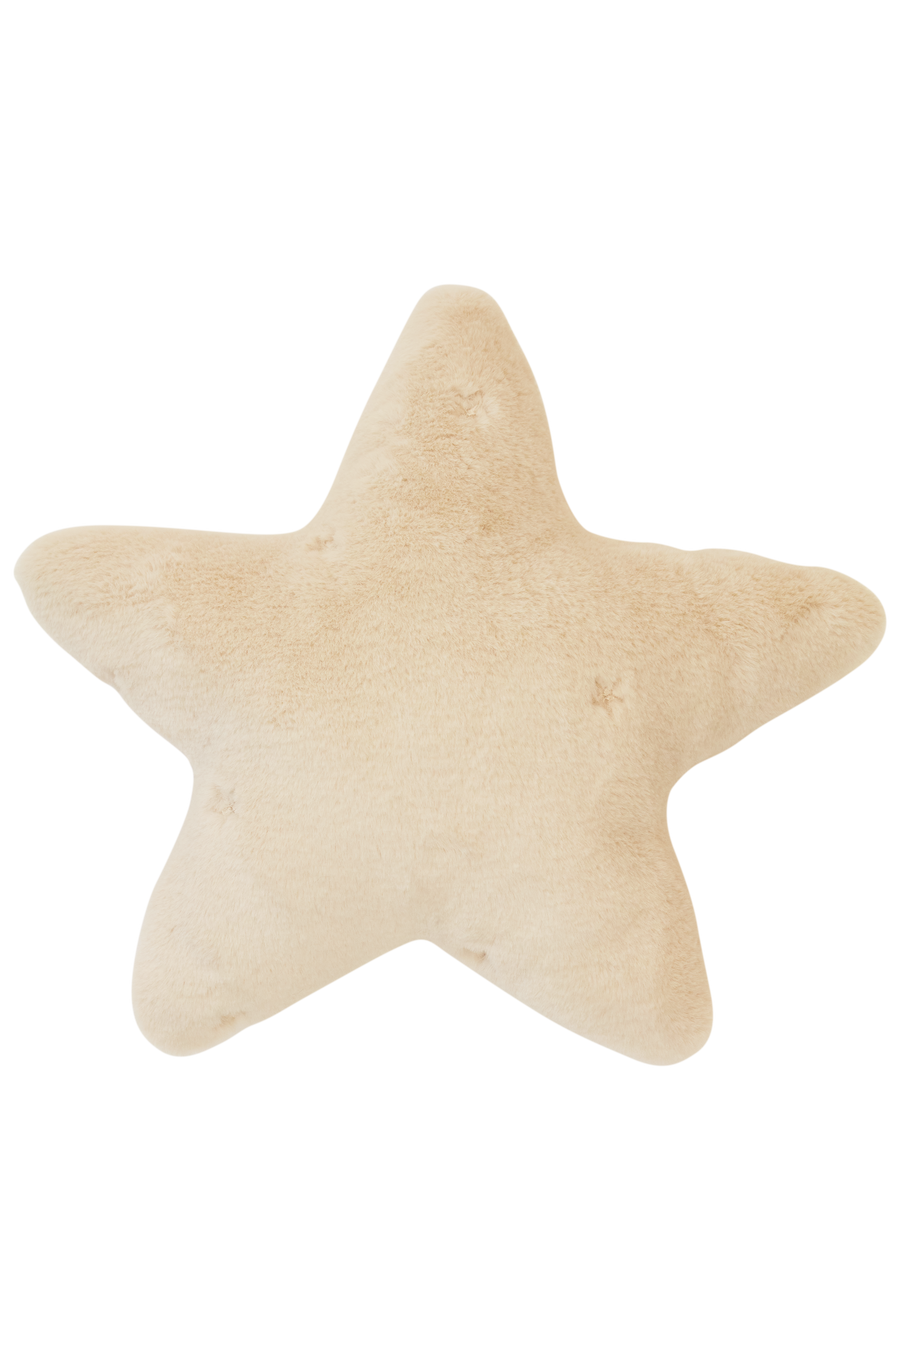 Embroidered star natural fur pillow by Kipp Baby